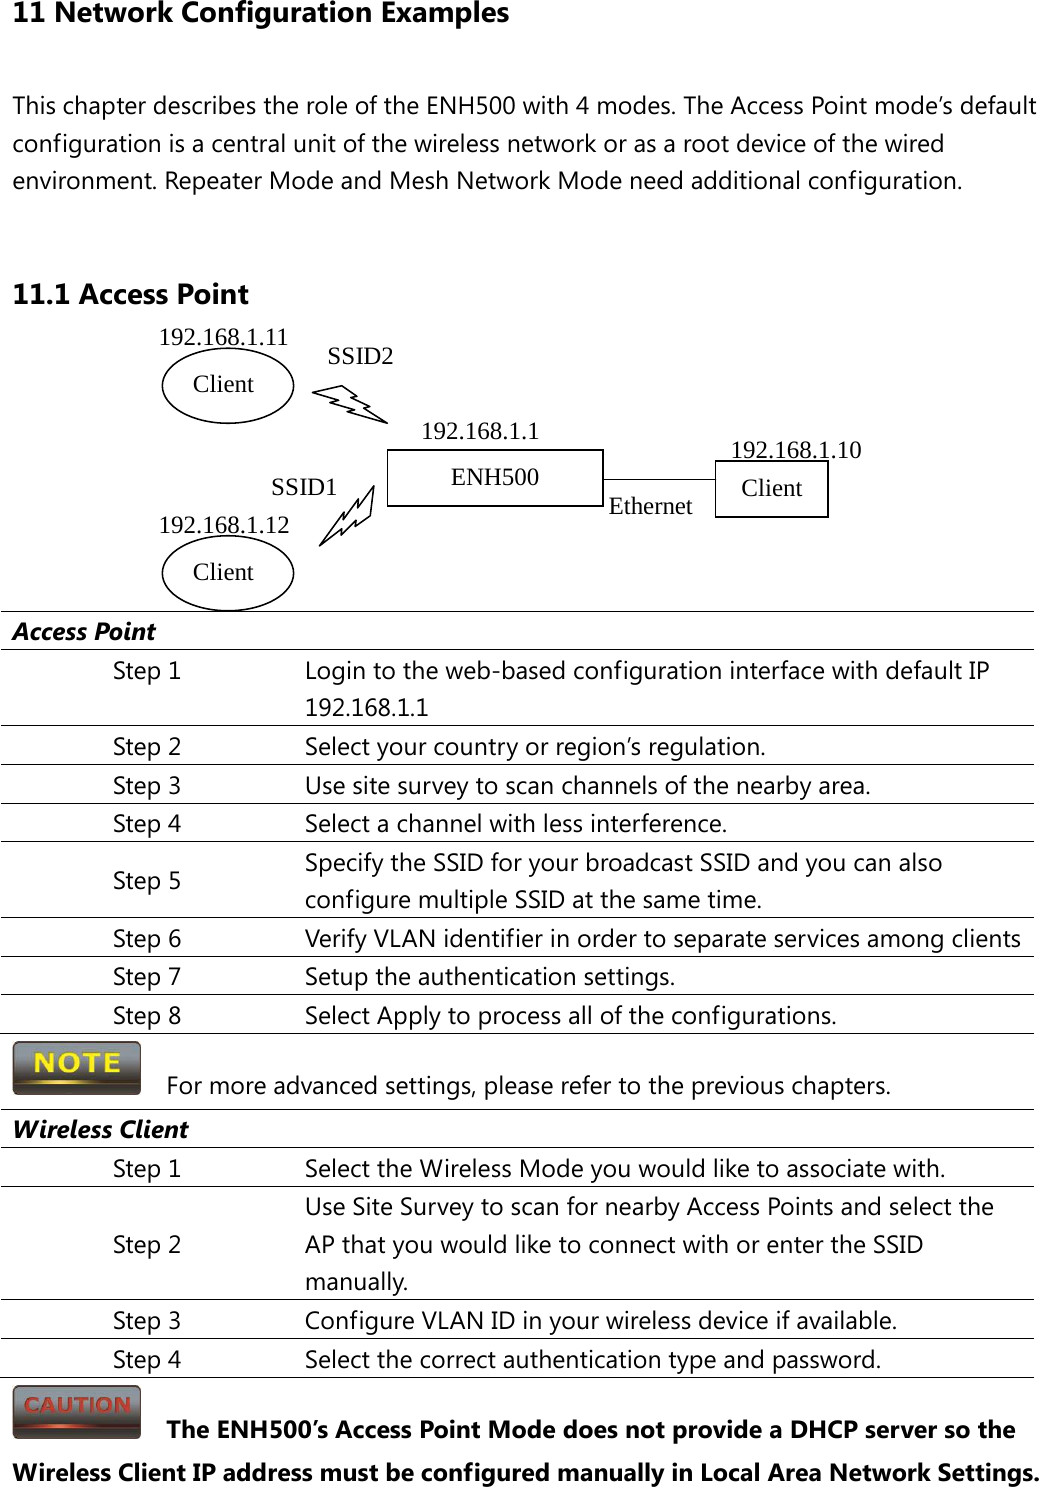 11 Network Configuration Examples This chapter describes the role of the ENH500 with 4 modes. The Access Point mode’s default configuration is a central unit of the wireless network or as a root device of the wired environment. Repeater Mode and Mesh Network Mode need additional configuration.  11.1 Access Point        Access Point Step 1 Login to the web-based configuration interface with default IP 192.168.1.1 Step 2 Select your country or region’s regulation. Step 3 Use site survey to scan channels of the nearby area. Step 4 Select a channel with less interference. Step 5 Specify the SSID for your broadcast SSID and you can also configure multiple SSID at the same time.   Step 6 Verify VLAN identifier in order to separate services among clients Step 7 Setup the authentication settings. Step 8 Select Apply to process all of the configurations.   For more advanced settings, please refer to the previous chapters. Wireless Client Step 1 Select the Wireless Mode you would like to associate with. Step 2 Use Site Survey to scan for nearby Access Points and select the AP that you would like to connect with or enter the SSID manually. Step 3 Configure VLAN ID in your wireless device if available. Step 4 Select the correct authentication type and password.   The ENH500’s Access Point Mode does not provide a DHCP server so the Wireless Client IP address must be configured manually in Local Area Network Settings. ENH500 Client Client SSID2 SSID1 Ethernet Client  192.168.1.1  192.168.1.10 192.168.1.11 192.168.1.12 